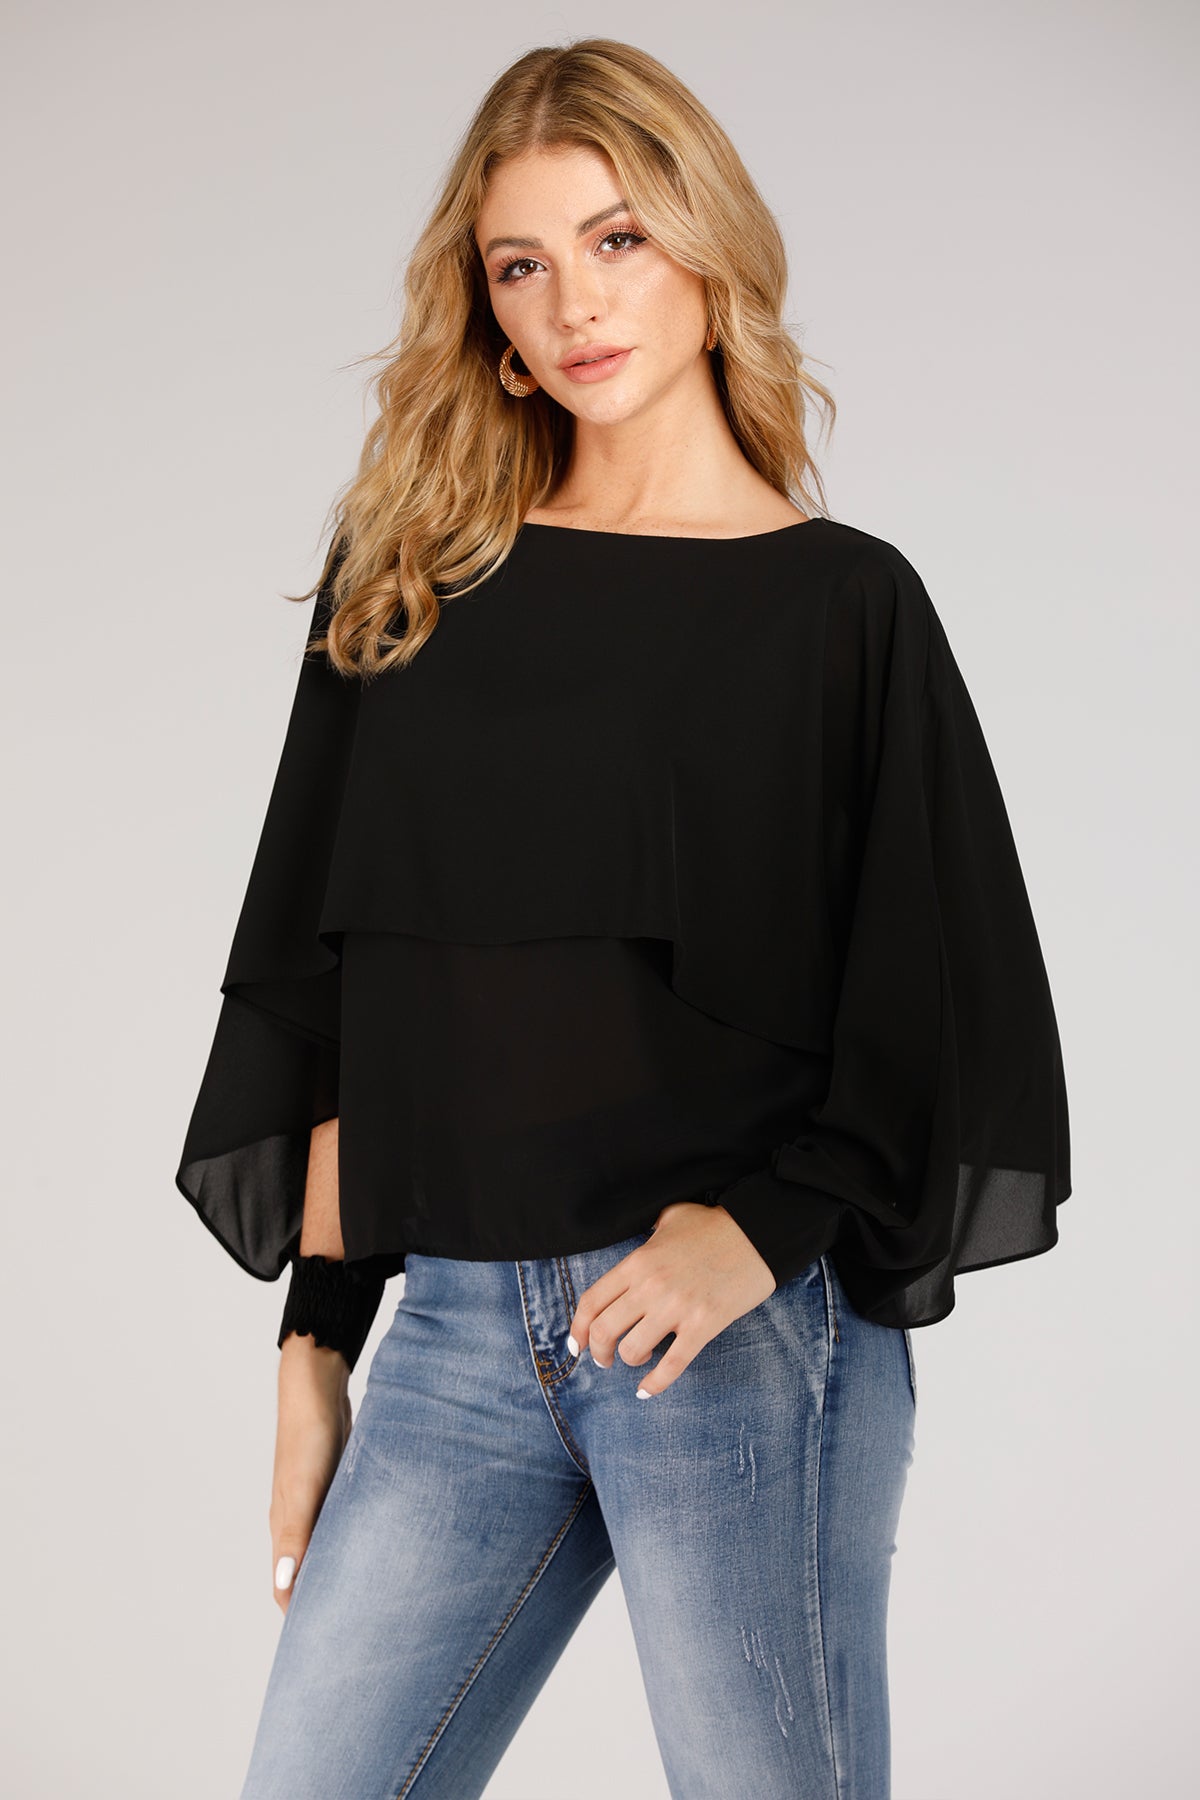 Blouse With Overlay And Open Sleeves Cuff